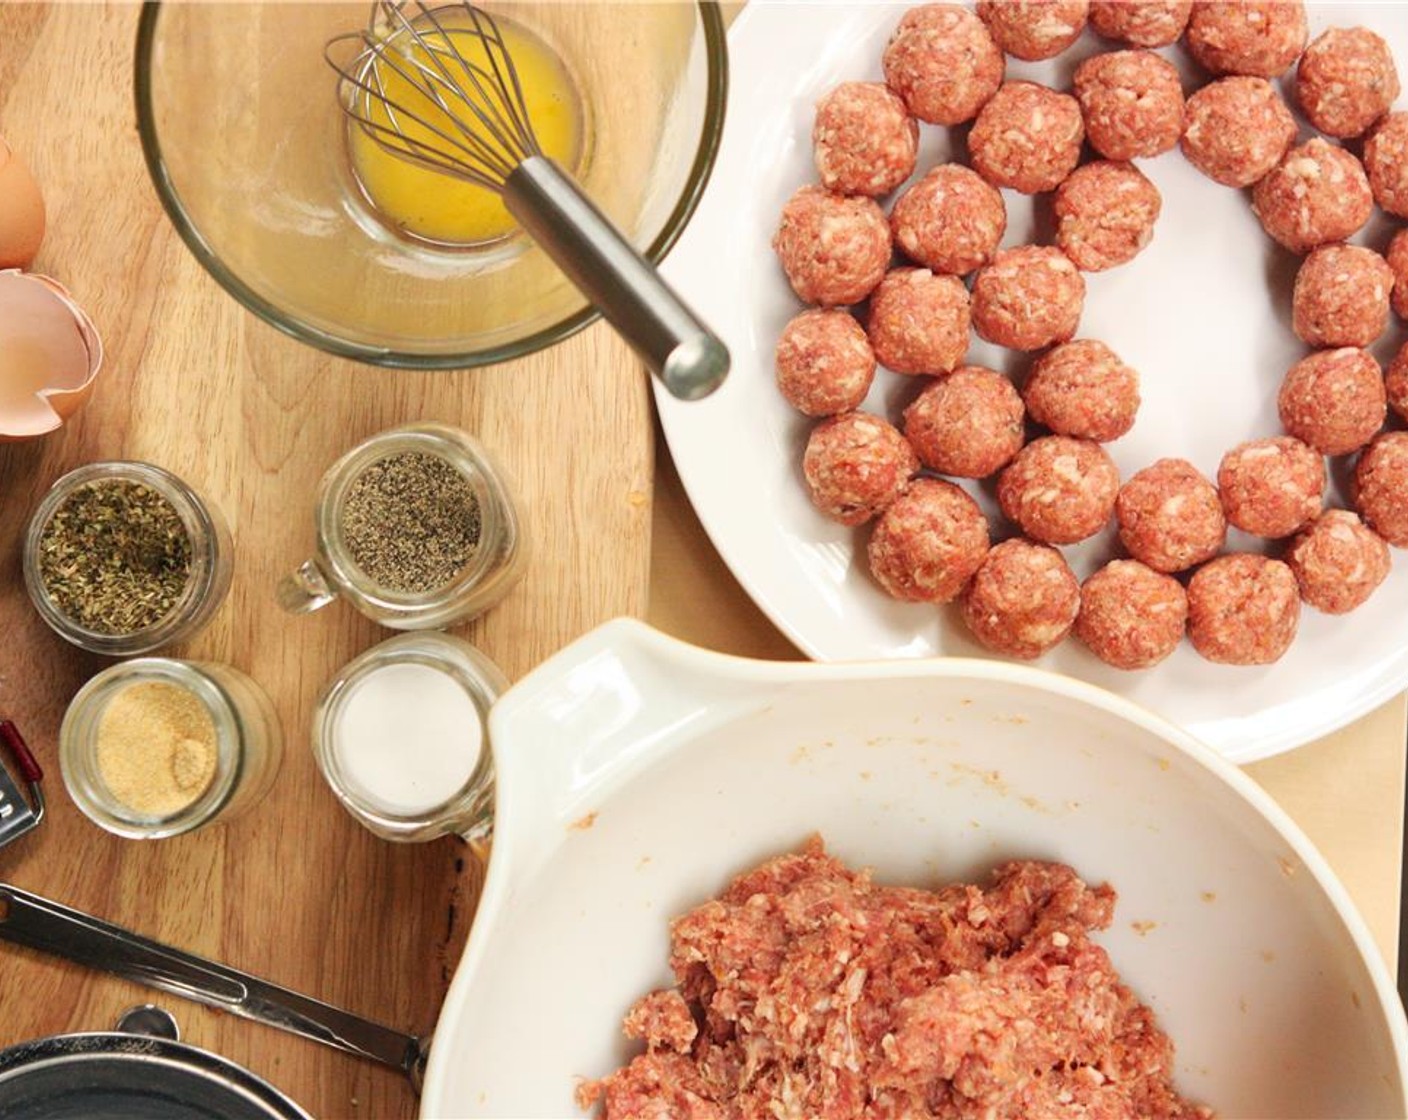 step 2 Working with small sections of the meat mixture, roll each section between your palms to create a ball about 1″ in diameter. Continue until the entire mixture has been rolled into balls.